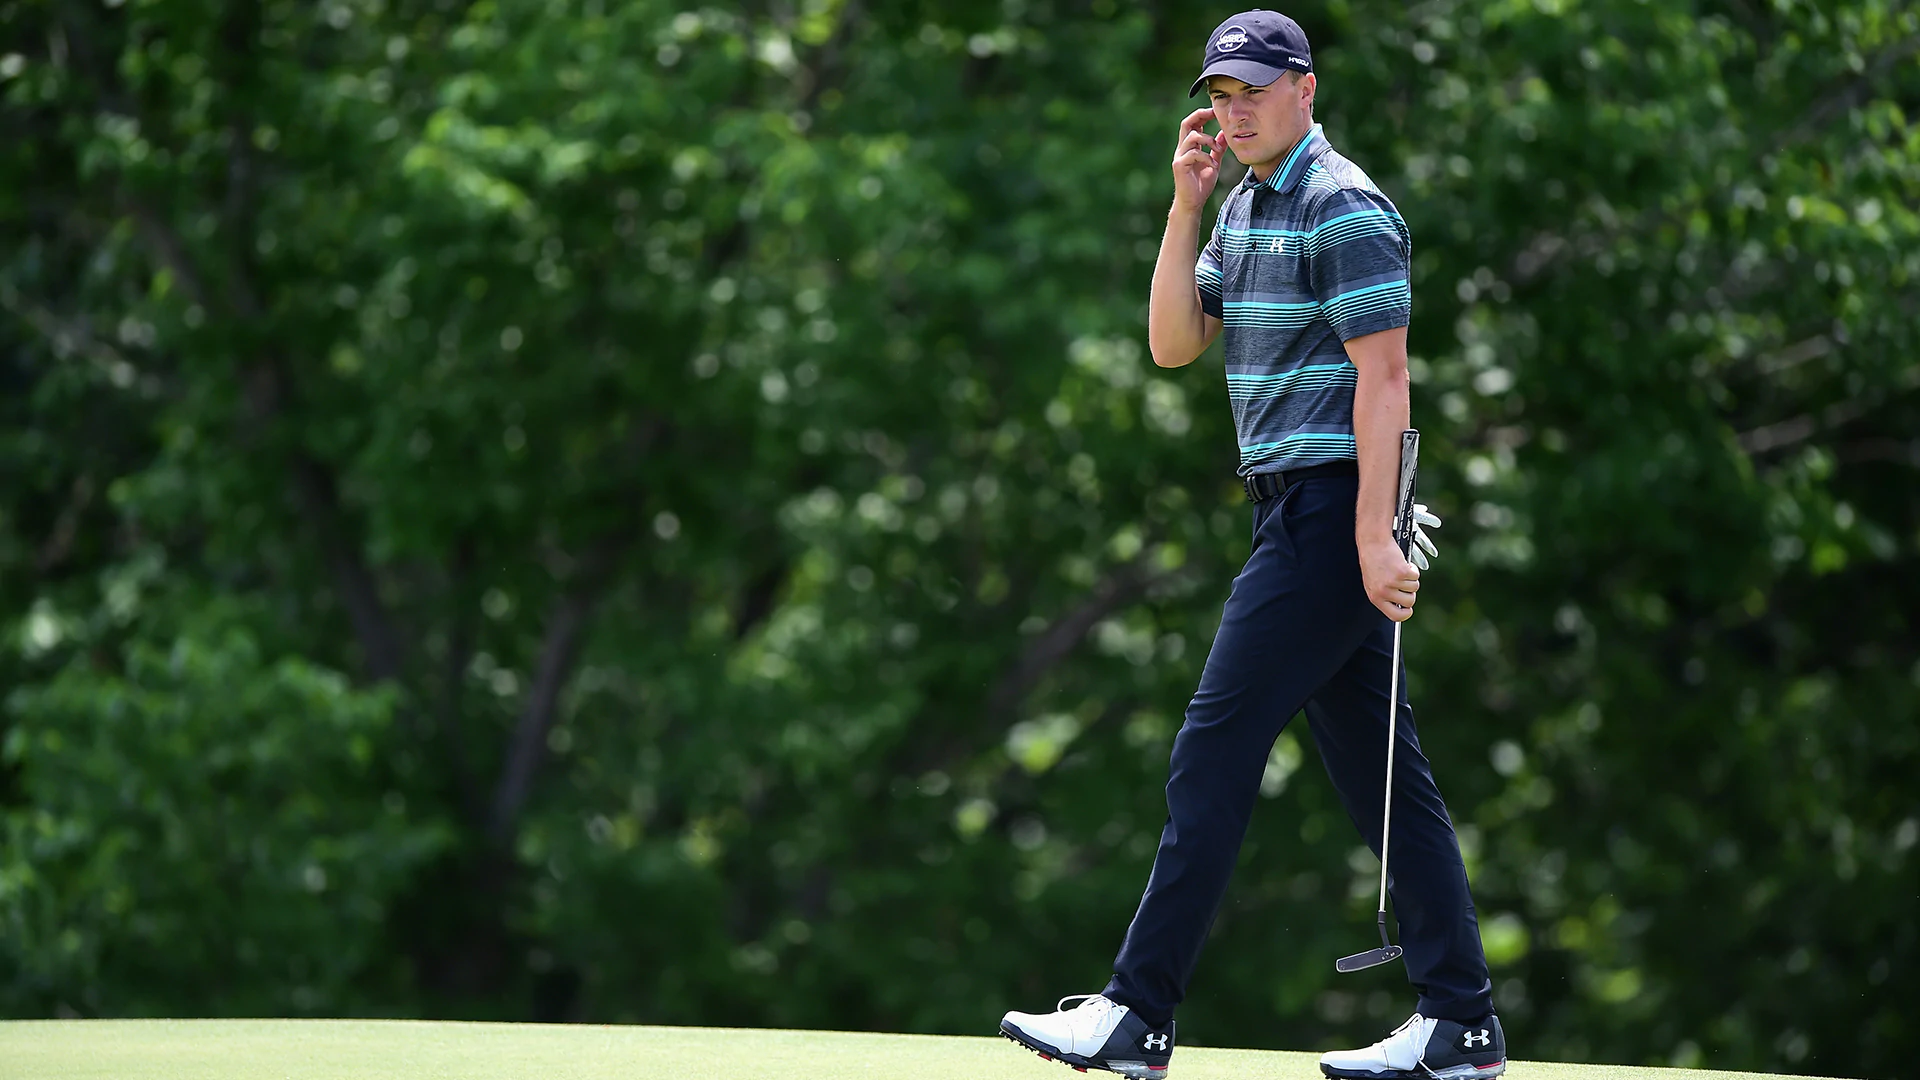 Spieth admits '16 Masters 'kind of haunted me'